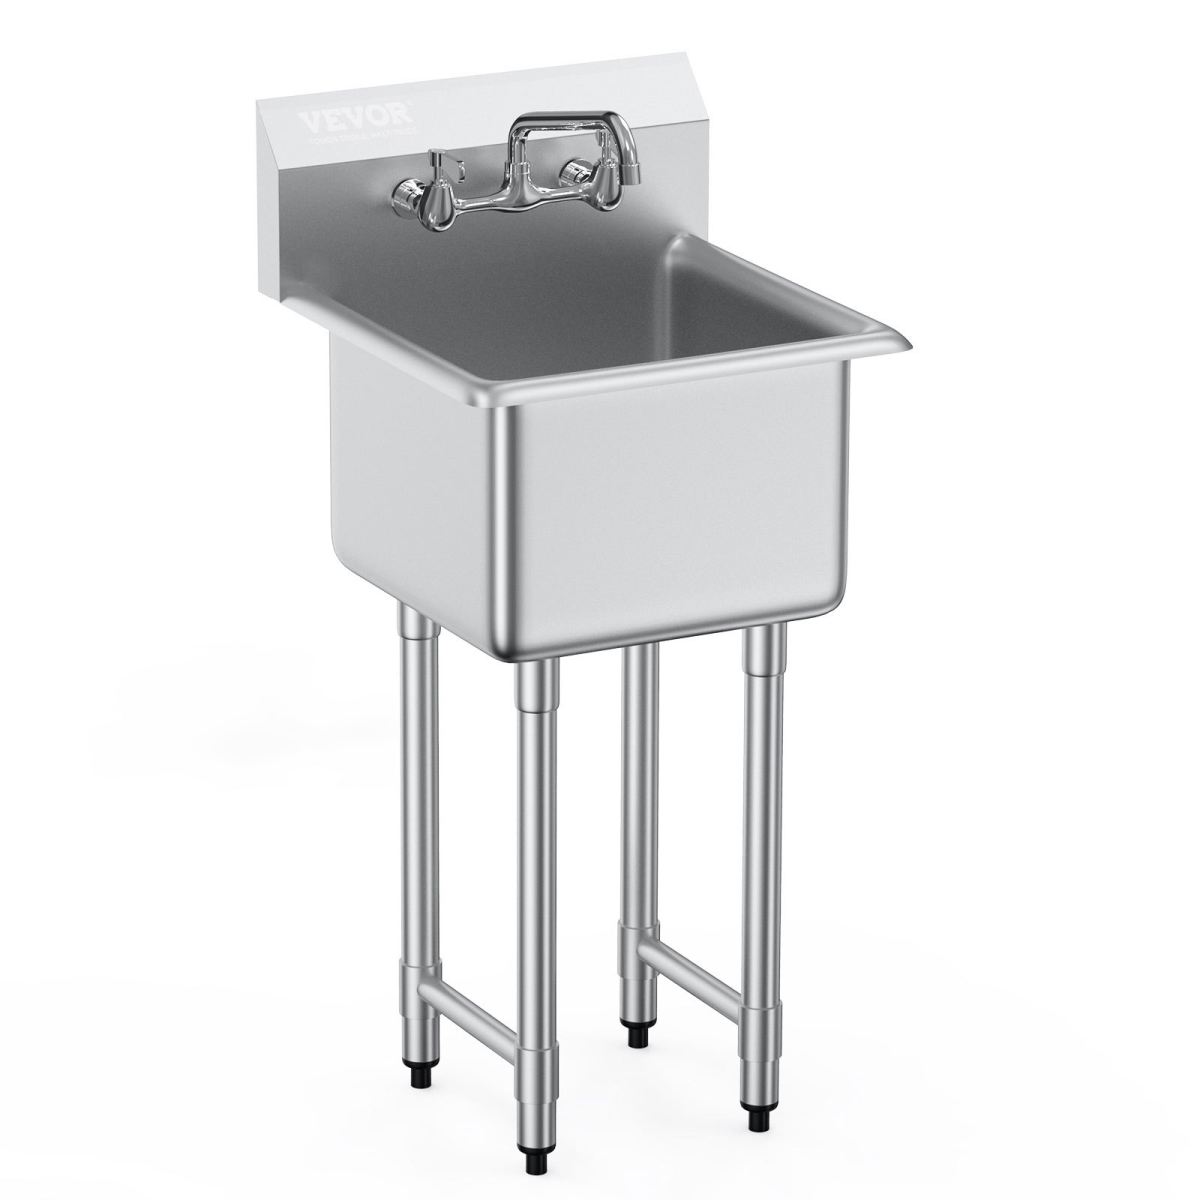 Picture of Vevor SYLSSCDCY1515HPD7V0 18 x 41 in. Stainless Steel Prep & Utility Compartment Free Standing Small Commercial Single Bowl Sinks